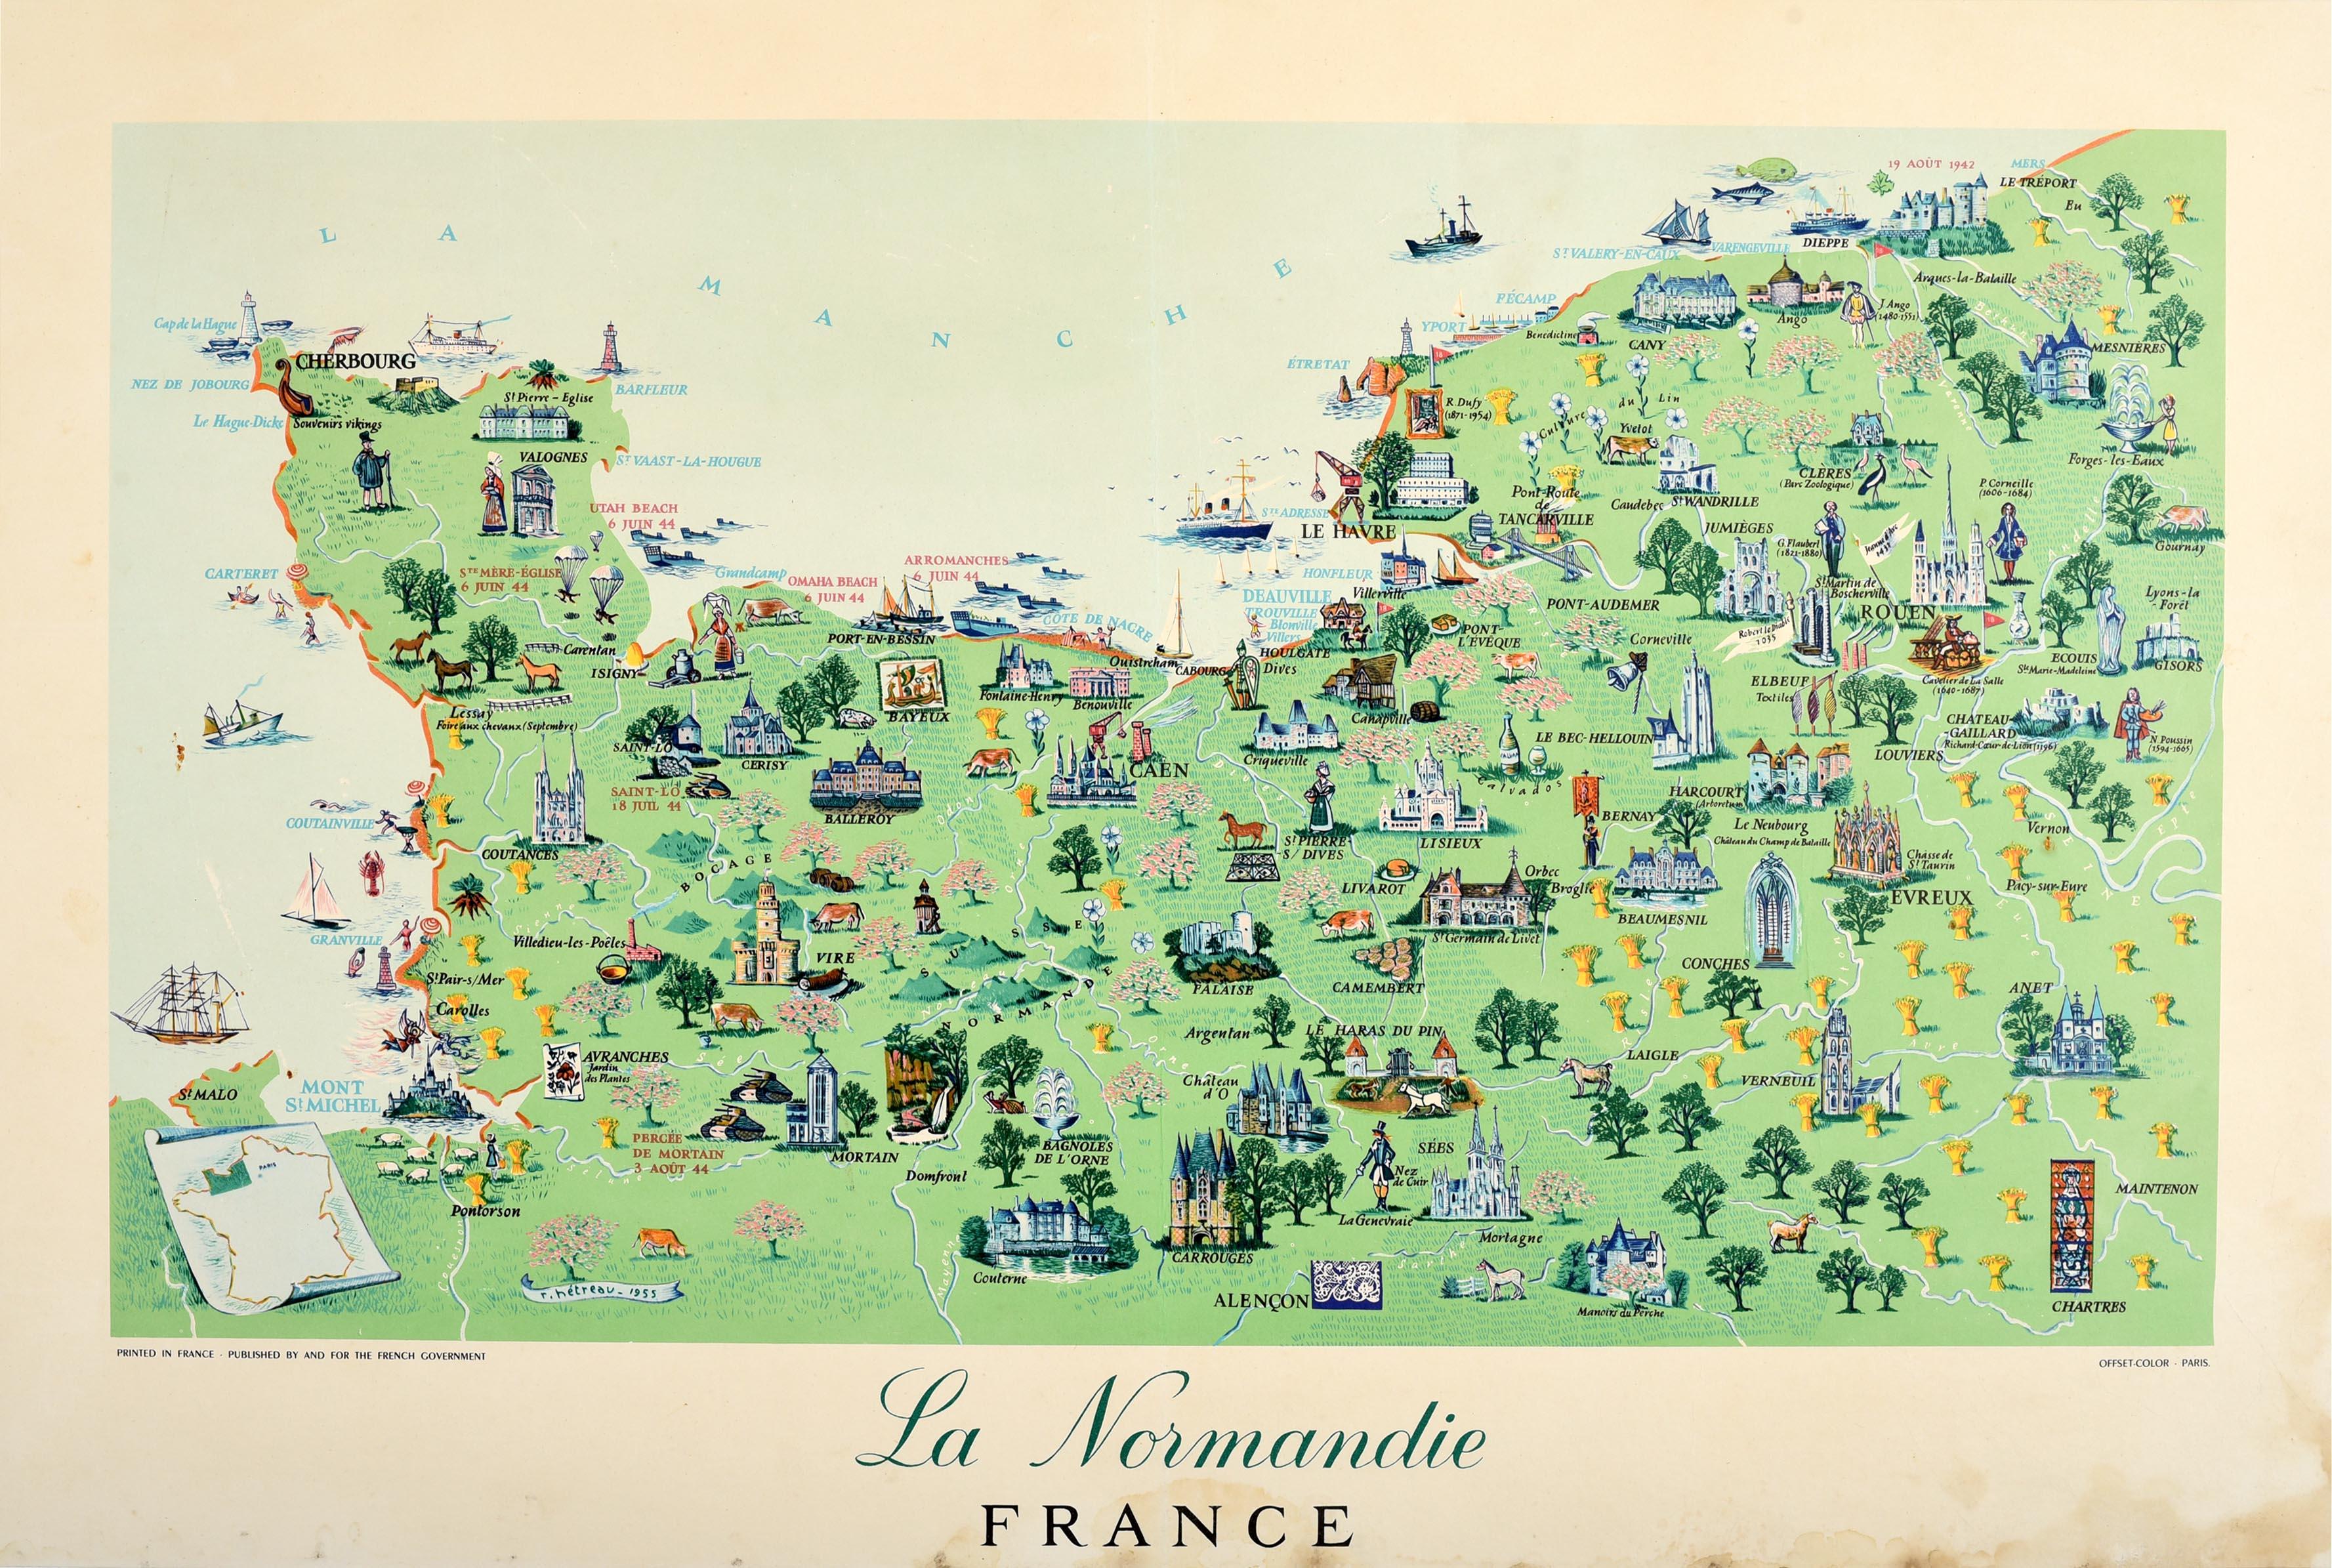 Unknown Print - Original Vintage Travel Poster For La Normandie France Normandy Illustrated Map